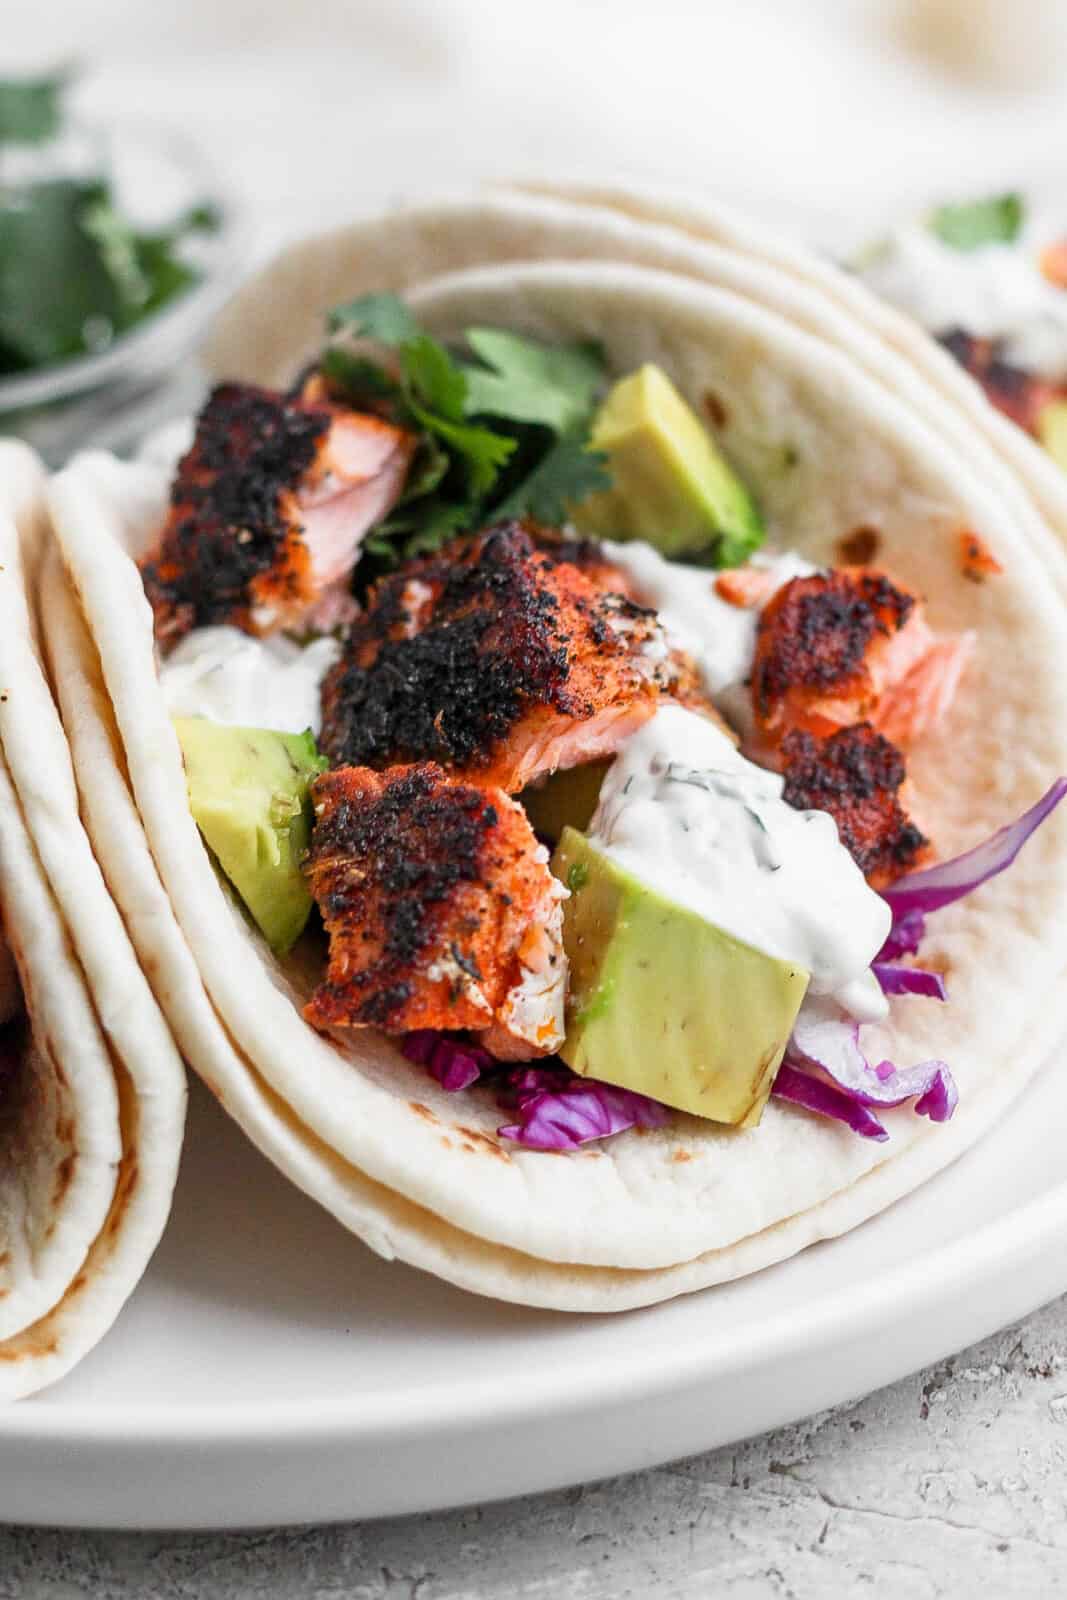 A close-up view of a blackened salmon taco with cilantro lime crema.